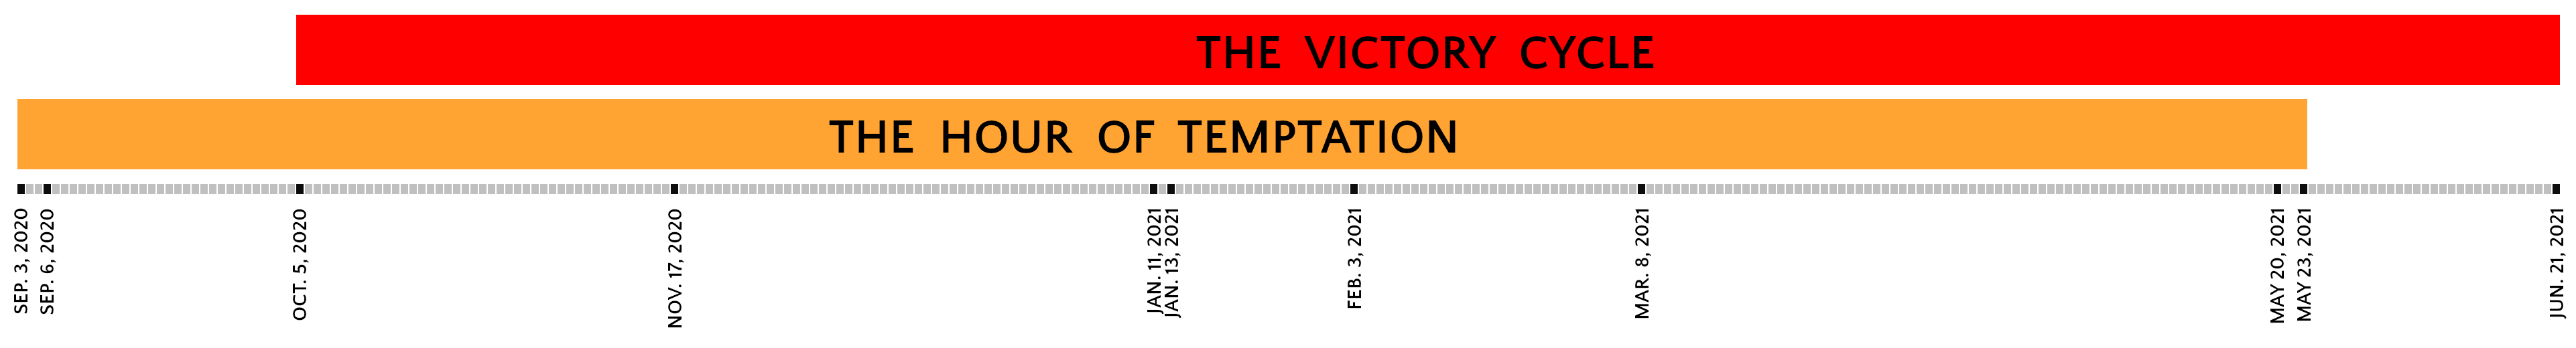 A timeline of the hour of temptation and the victory cycle